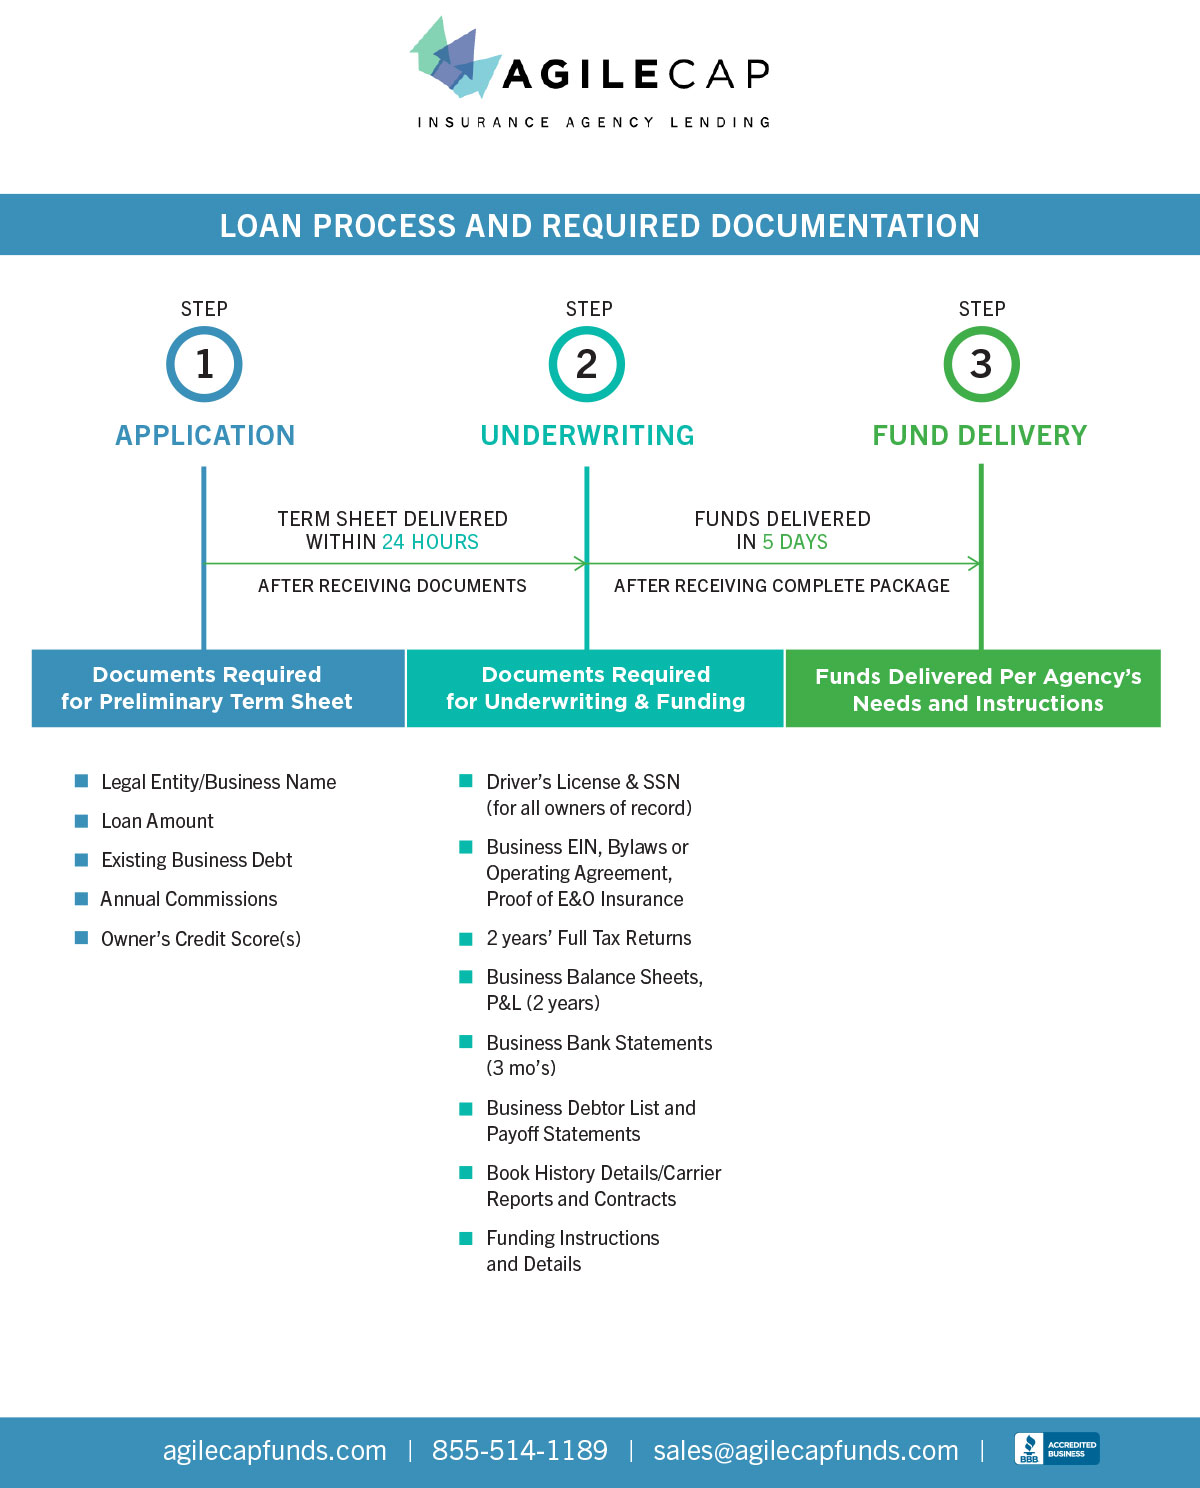 AgileCap loan process and required documentation sheet